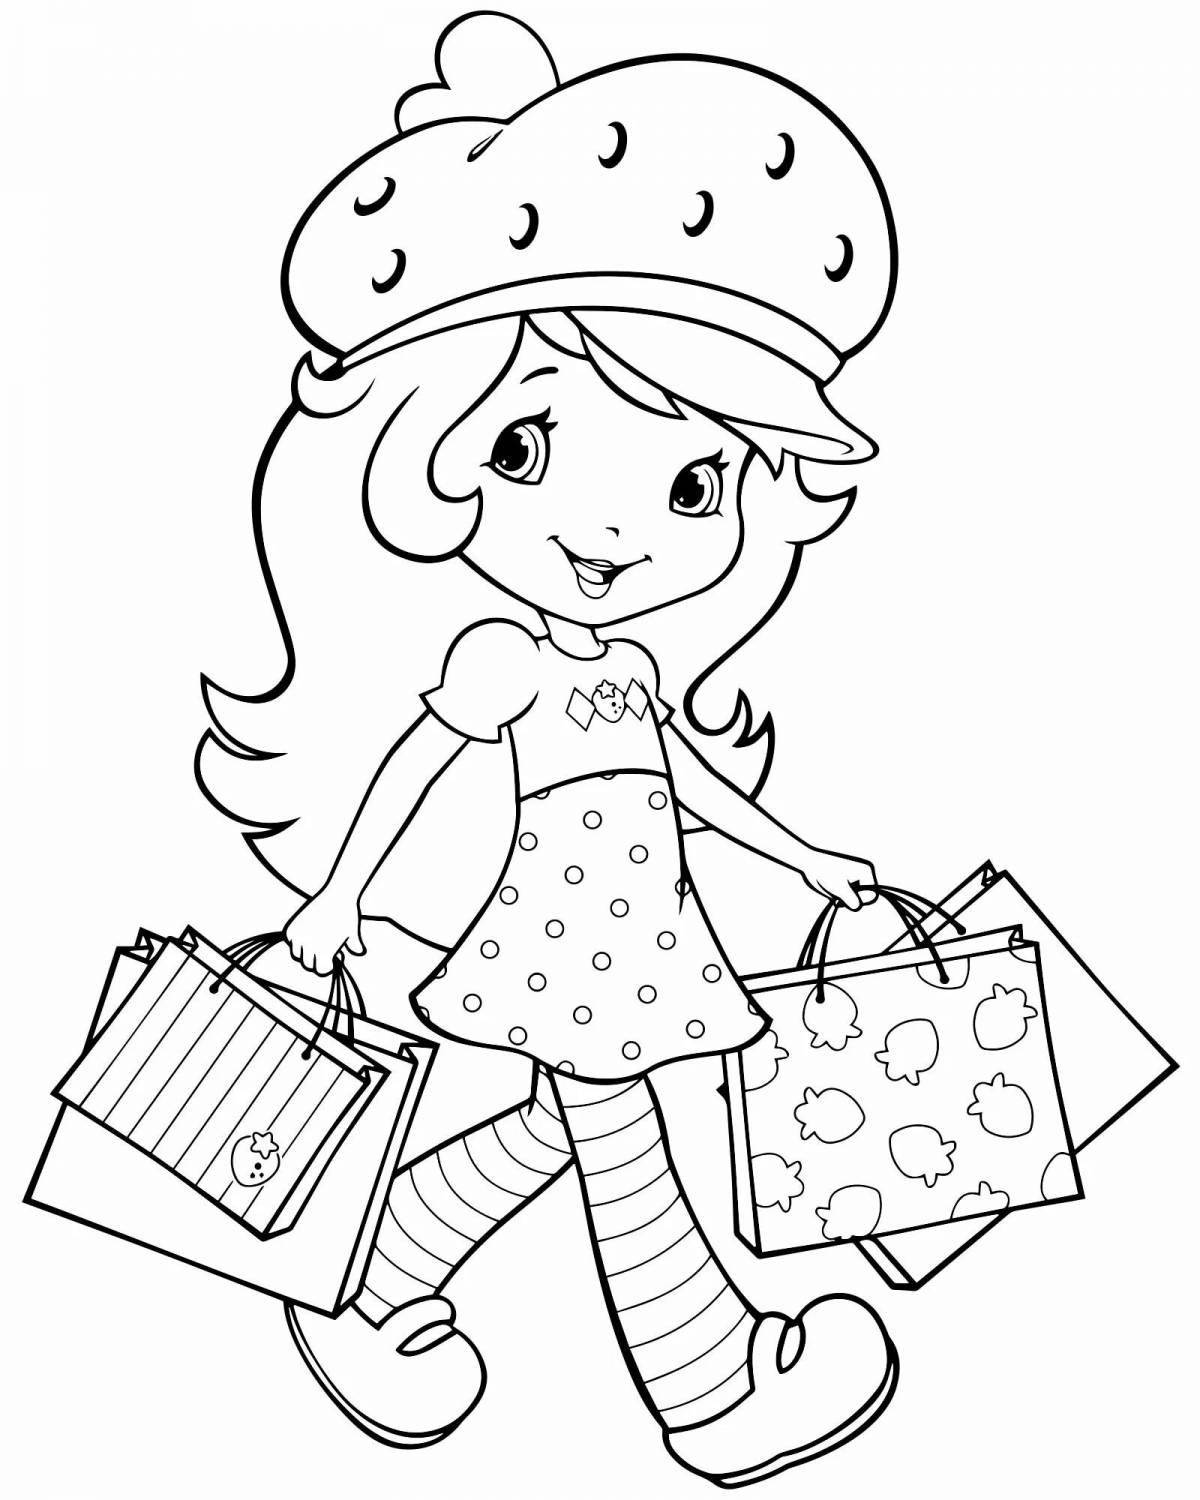 Coloring page gorgeous shop for girls